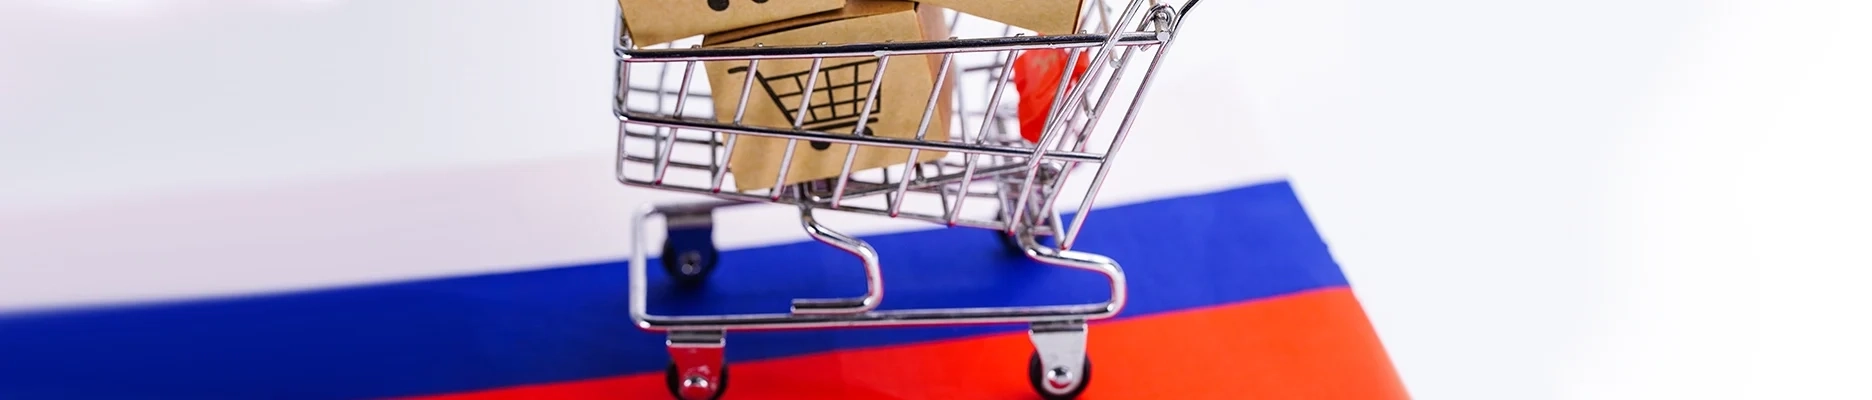 Russian Ecommerce Market Overview